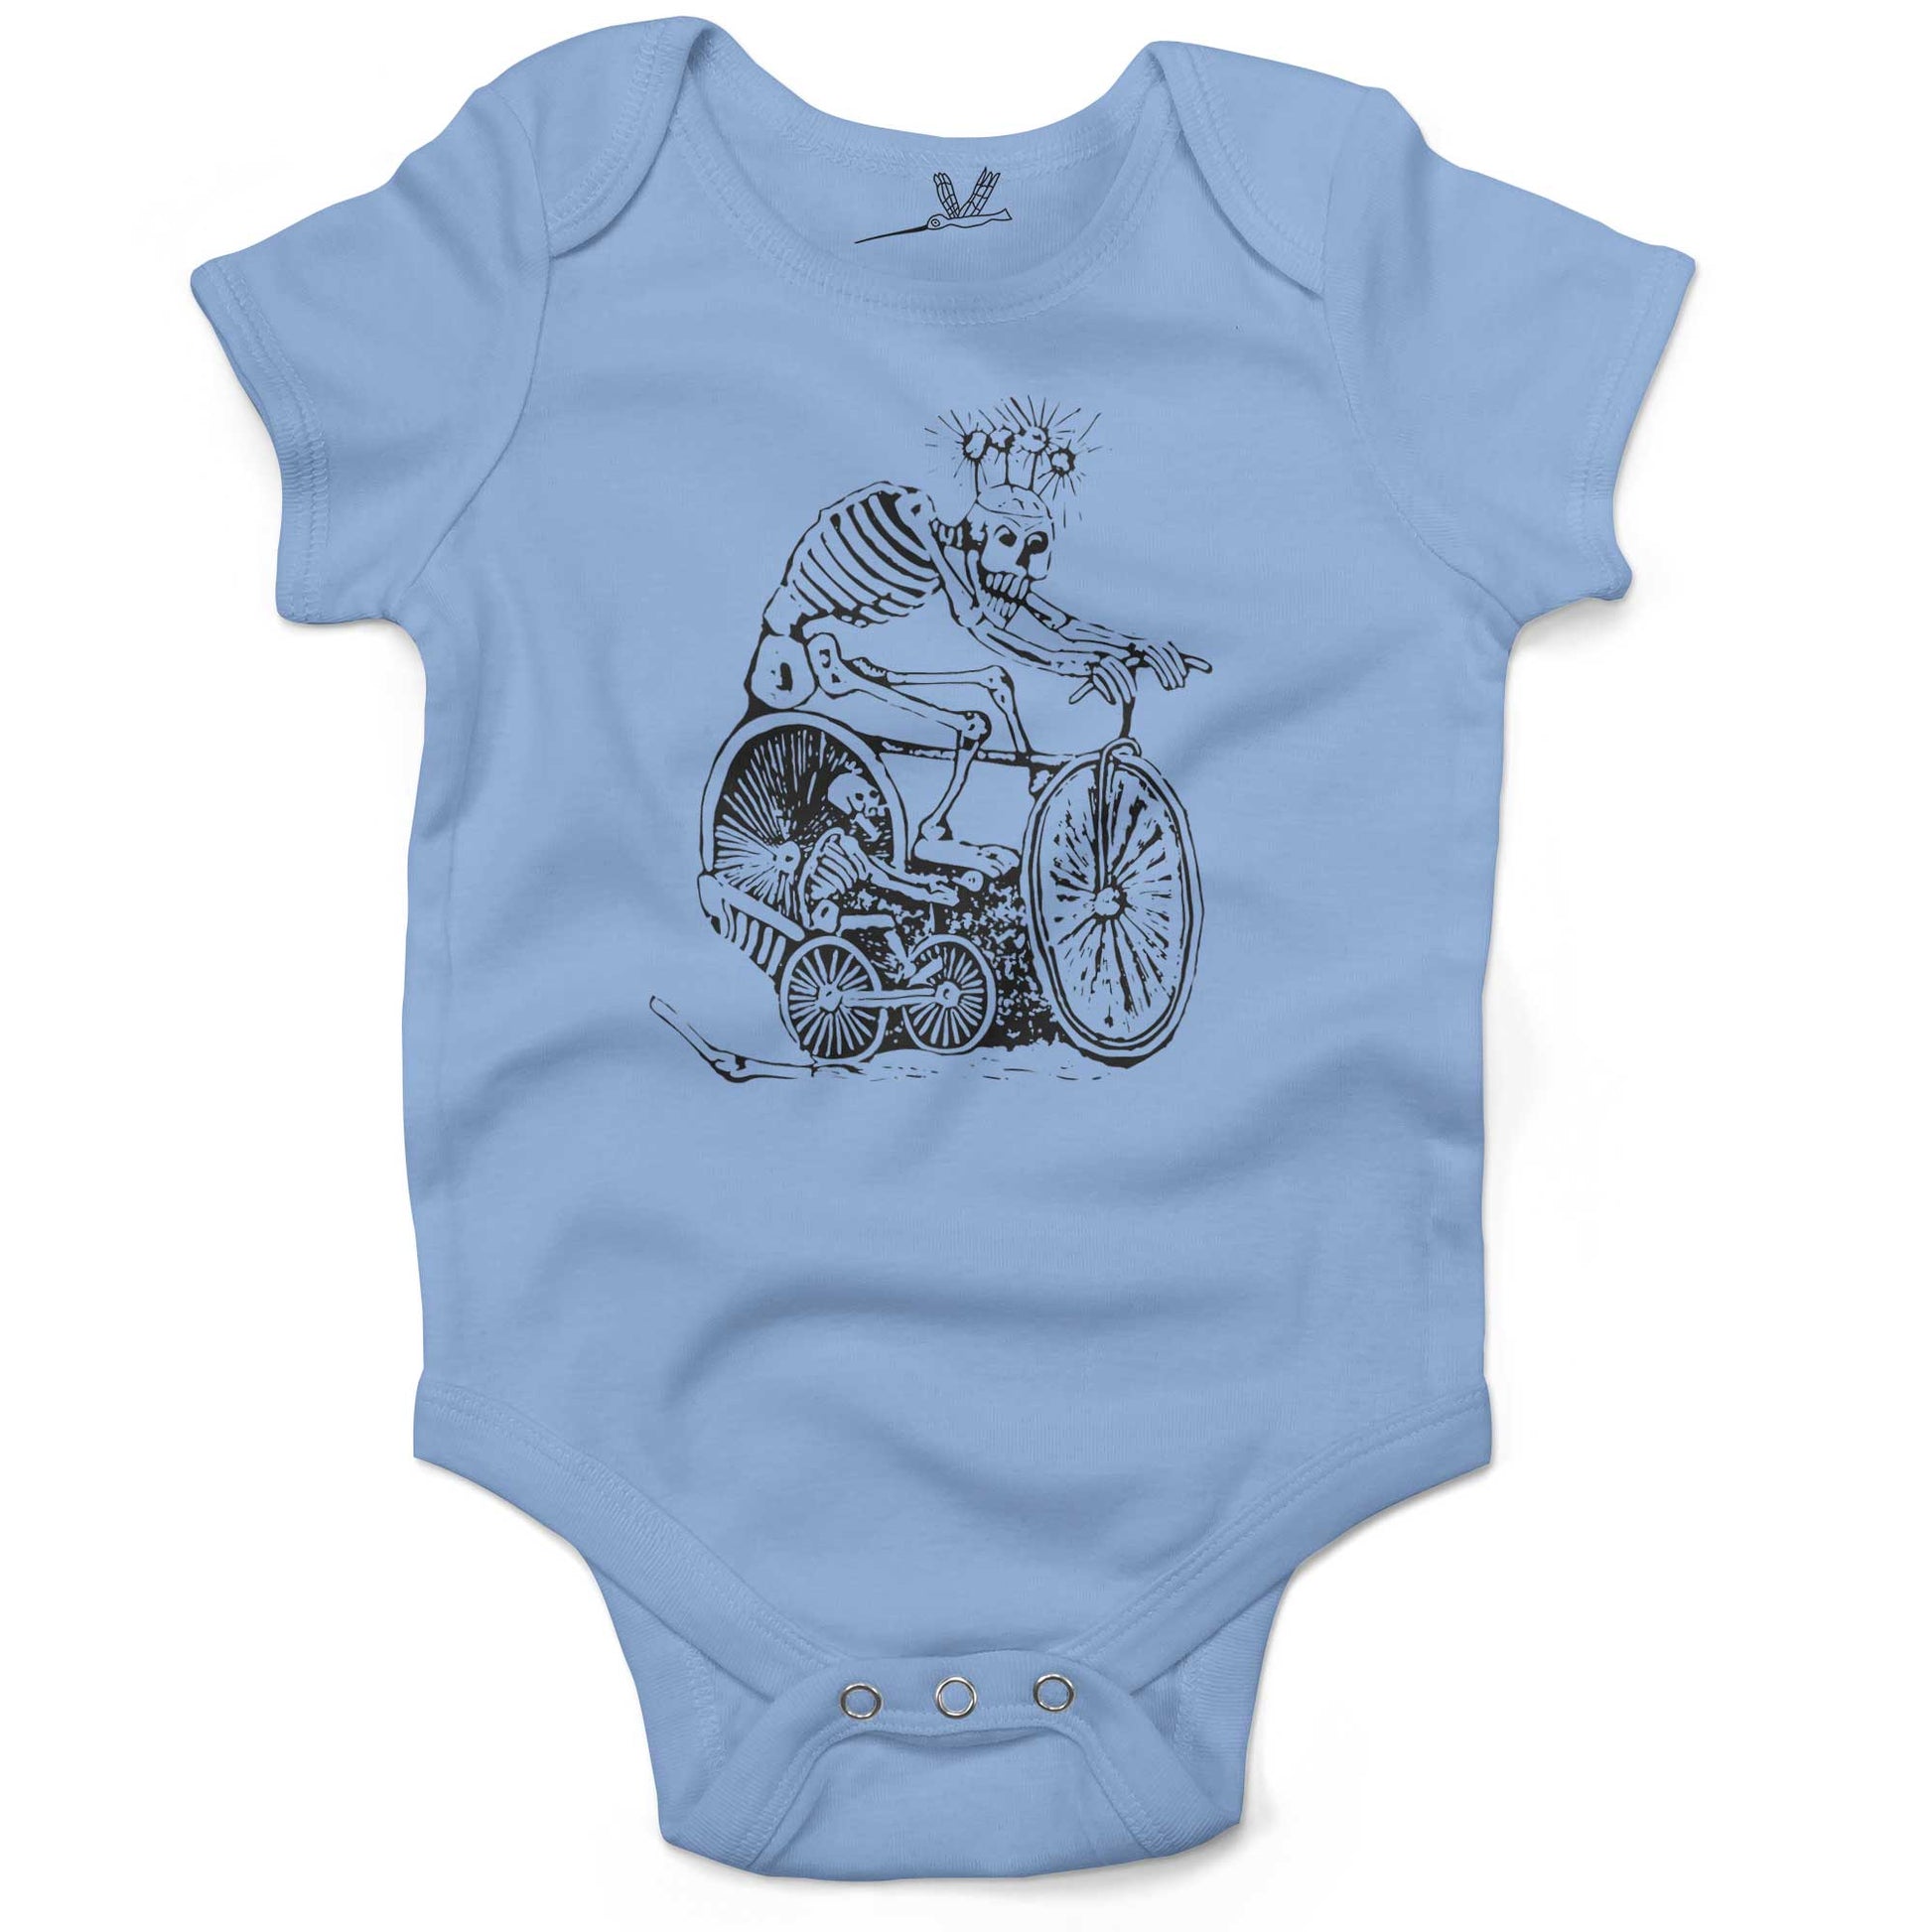 Day of the Dead Bikers Infant Bodysuit or Raglan Tee-Organic Baby Blue-3-6 months